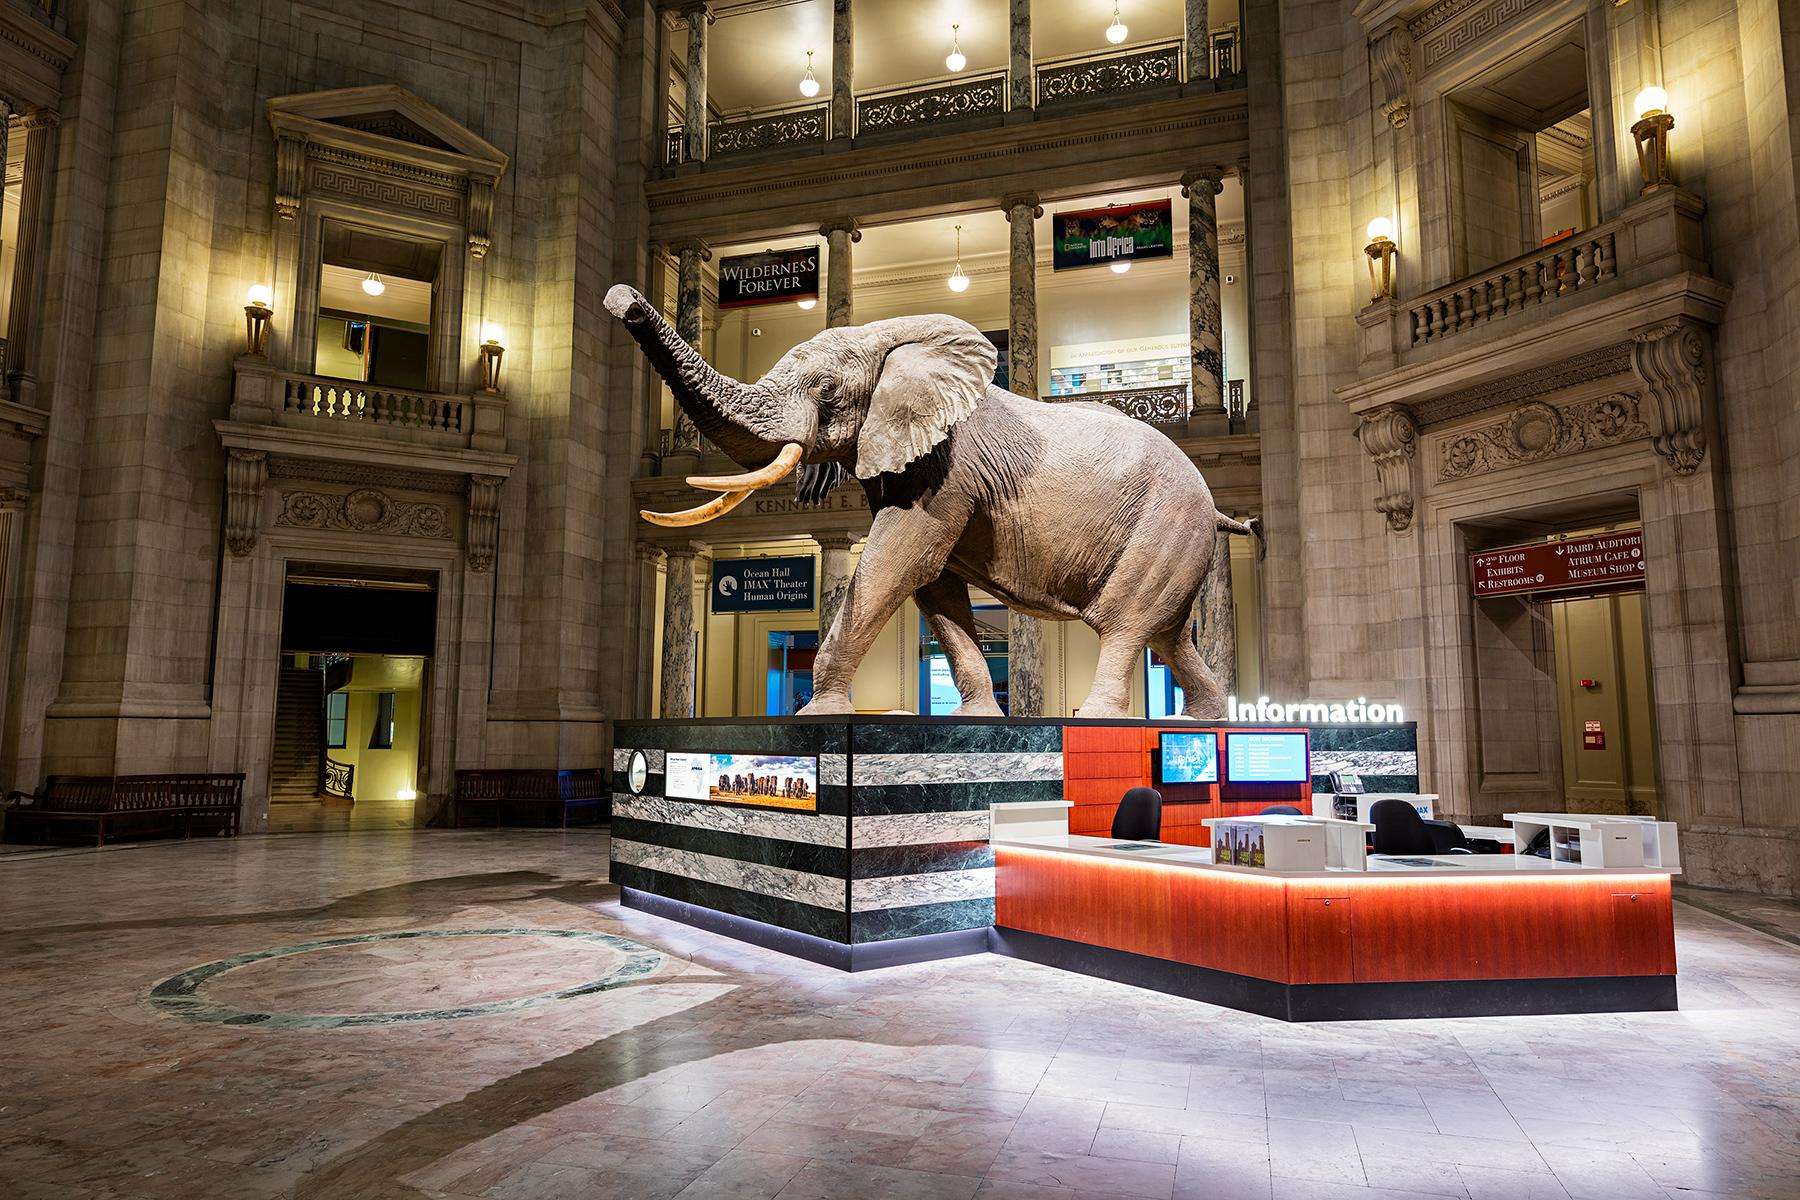 The Best Museums in Washington D.C.